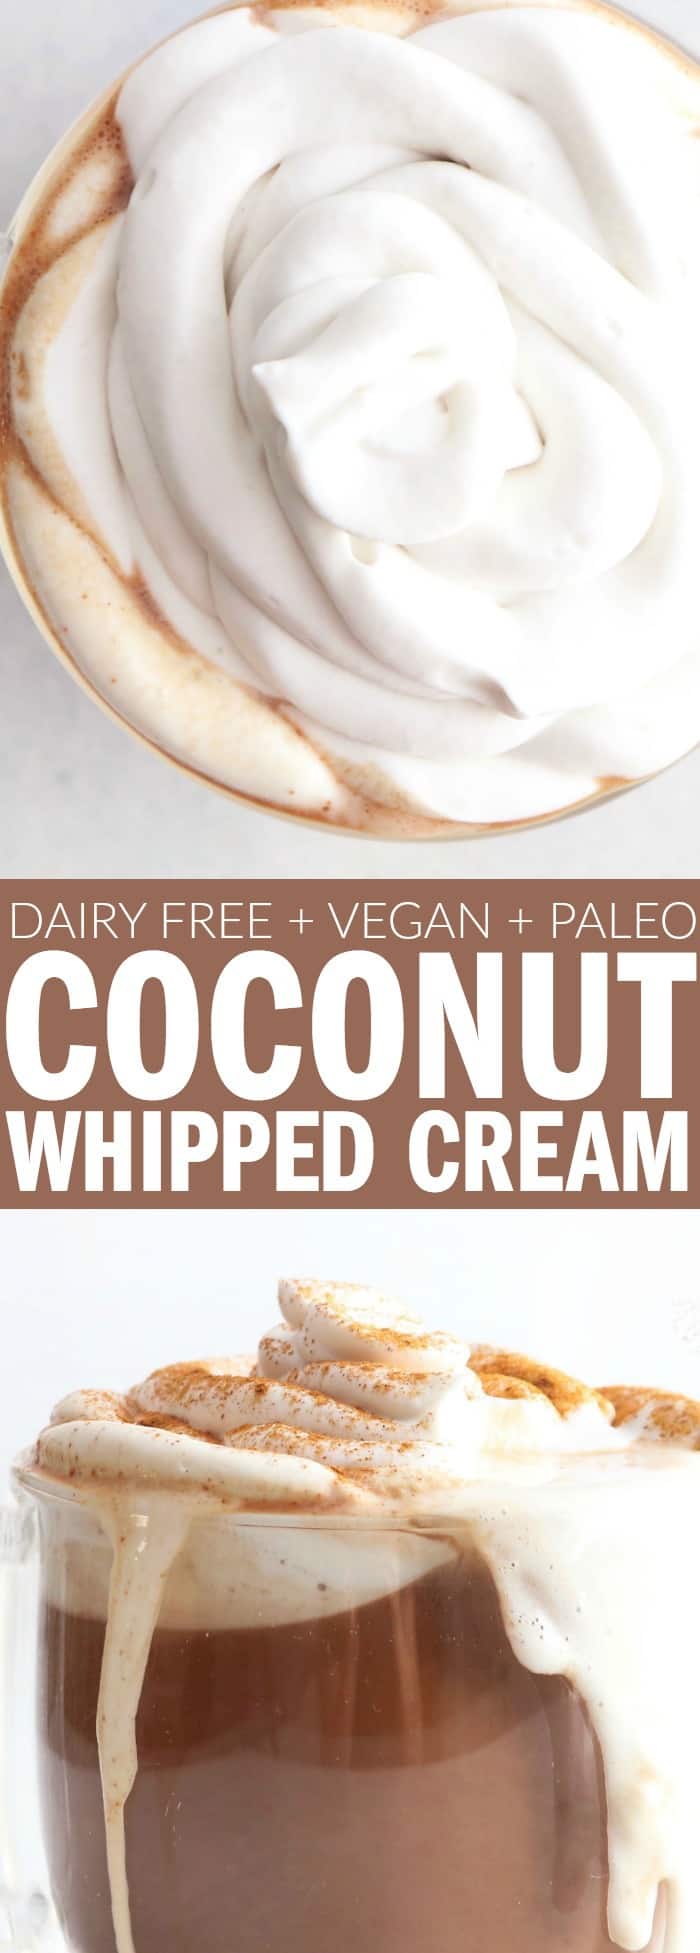 So excited to finally share how to make Coconut Whipped Cream! It's only four simple ingredients, and the perfect dairy free, vegan, and paleo whipped topping! thetoastedpinenut.com #vegan #paleo #dairyfree #whippedcream #coconut